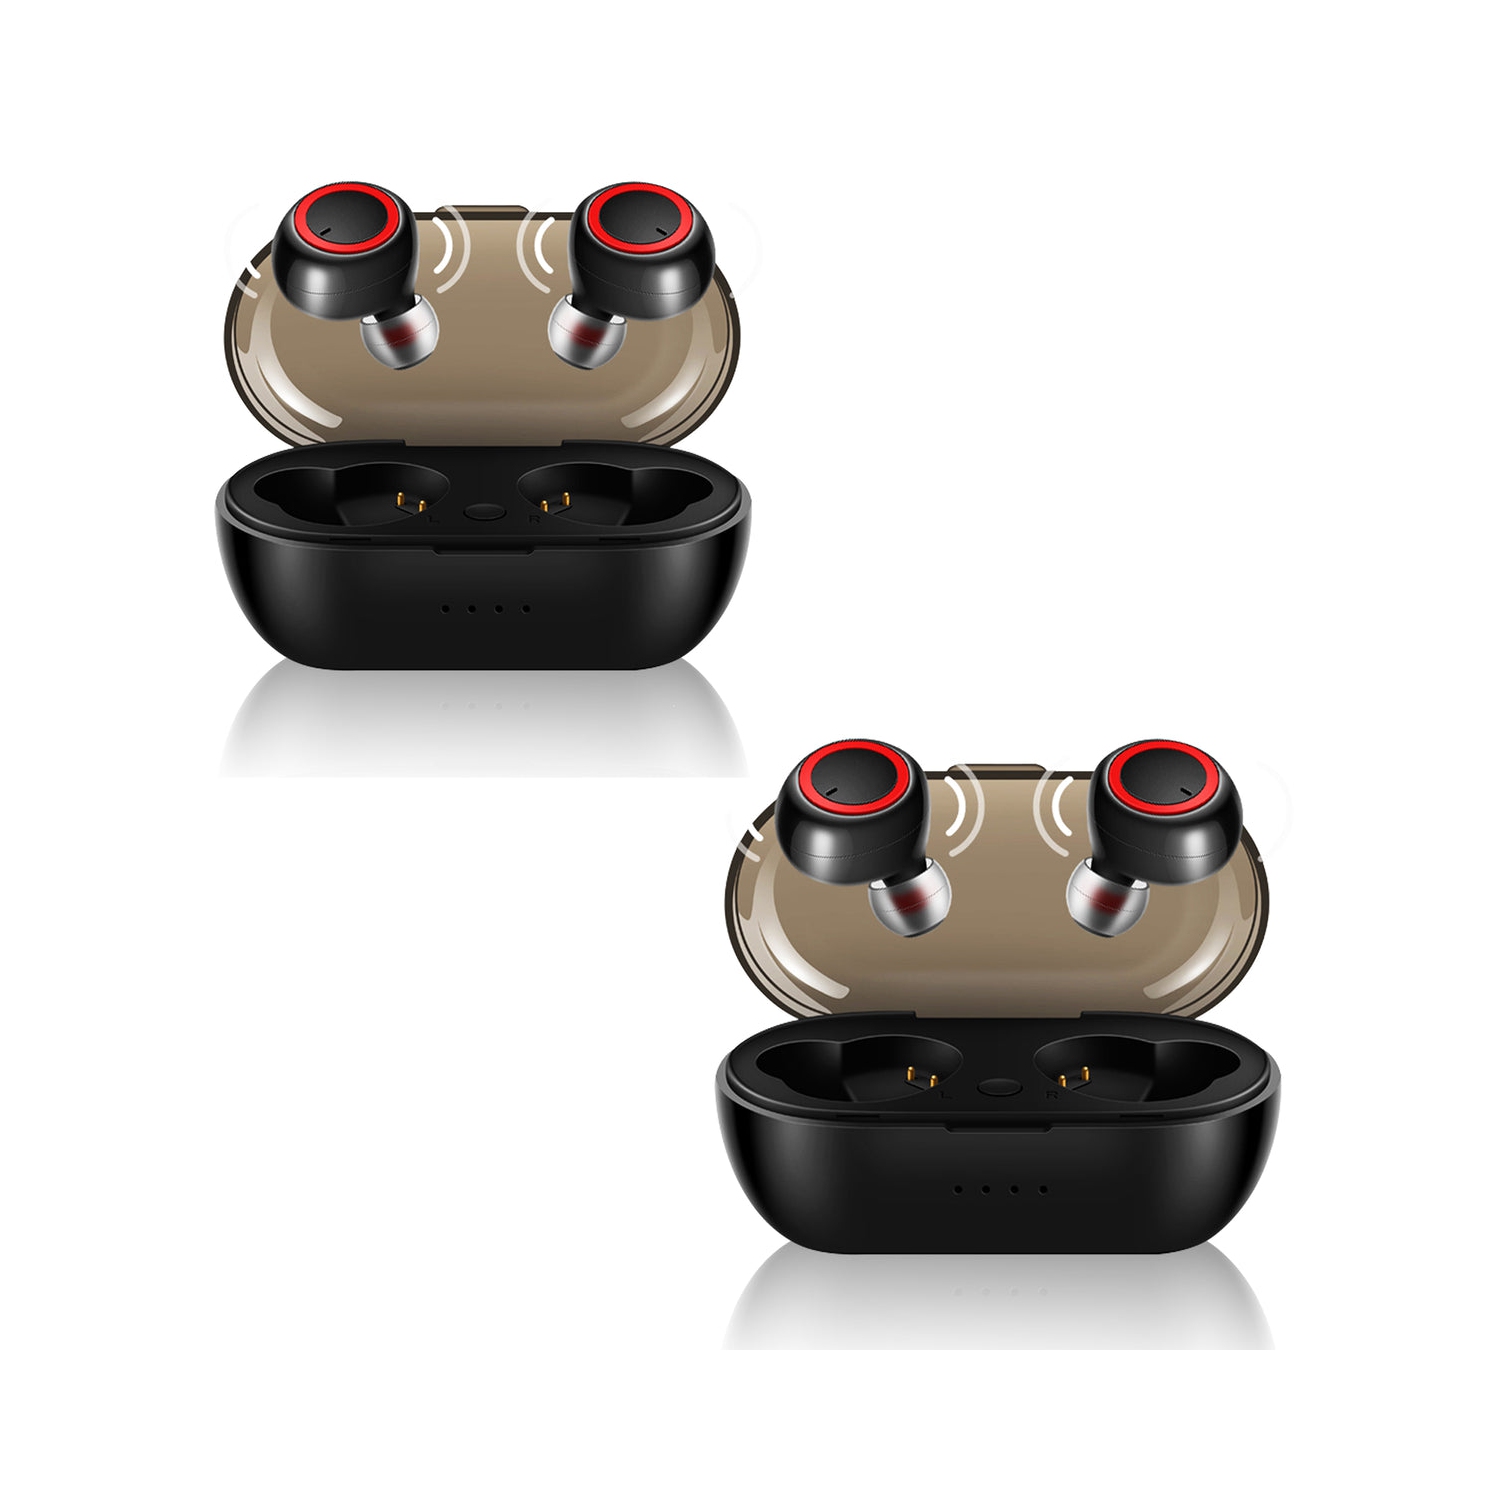 Wireless Earbuds Black 2 Pieces Noise Canceling Headphones Wireless Bluetooth 5.0 Powerful Beats and Clean Audio True w Extra Long Playback Use as Gym Headphones Gaming Calling